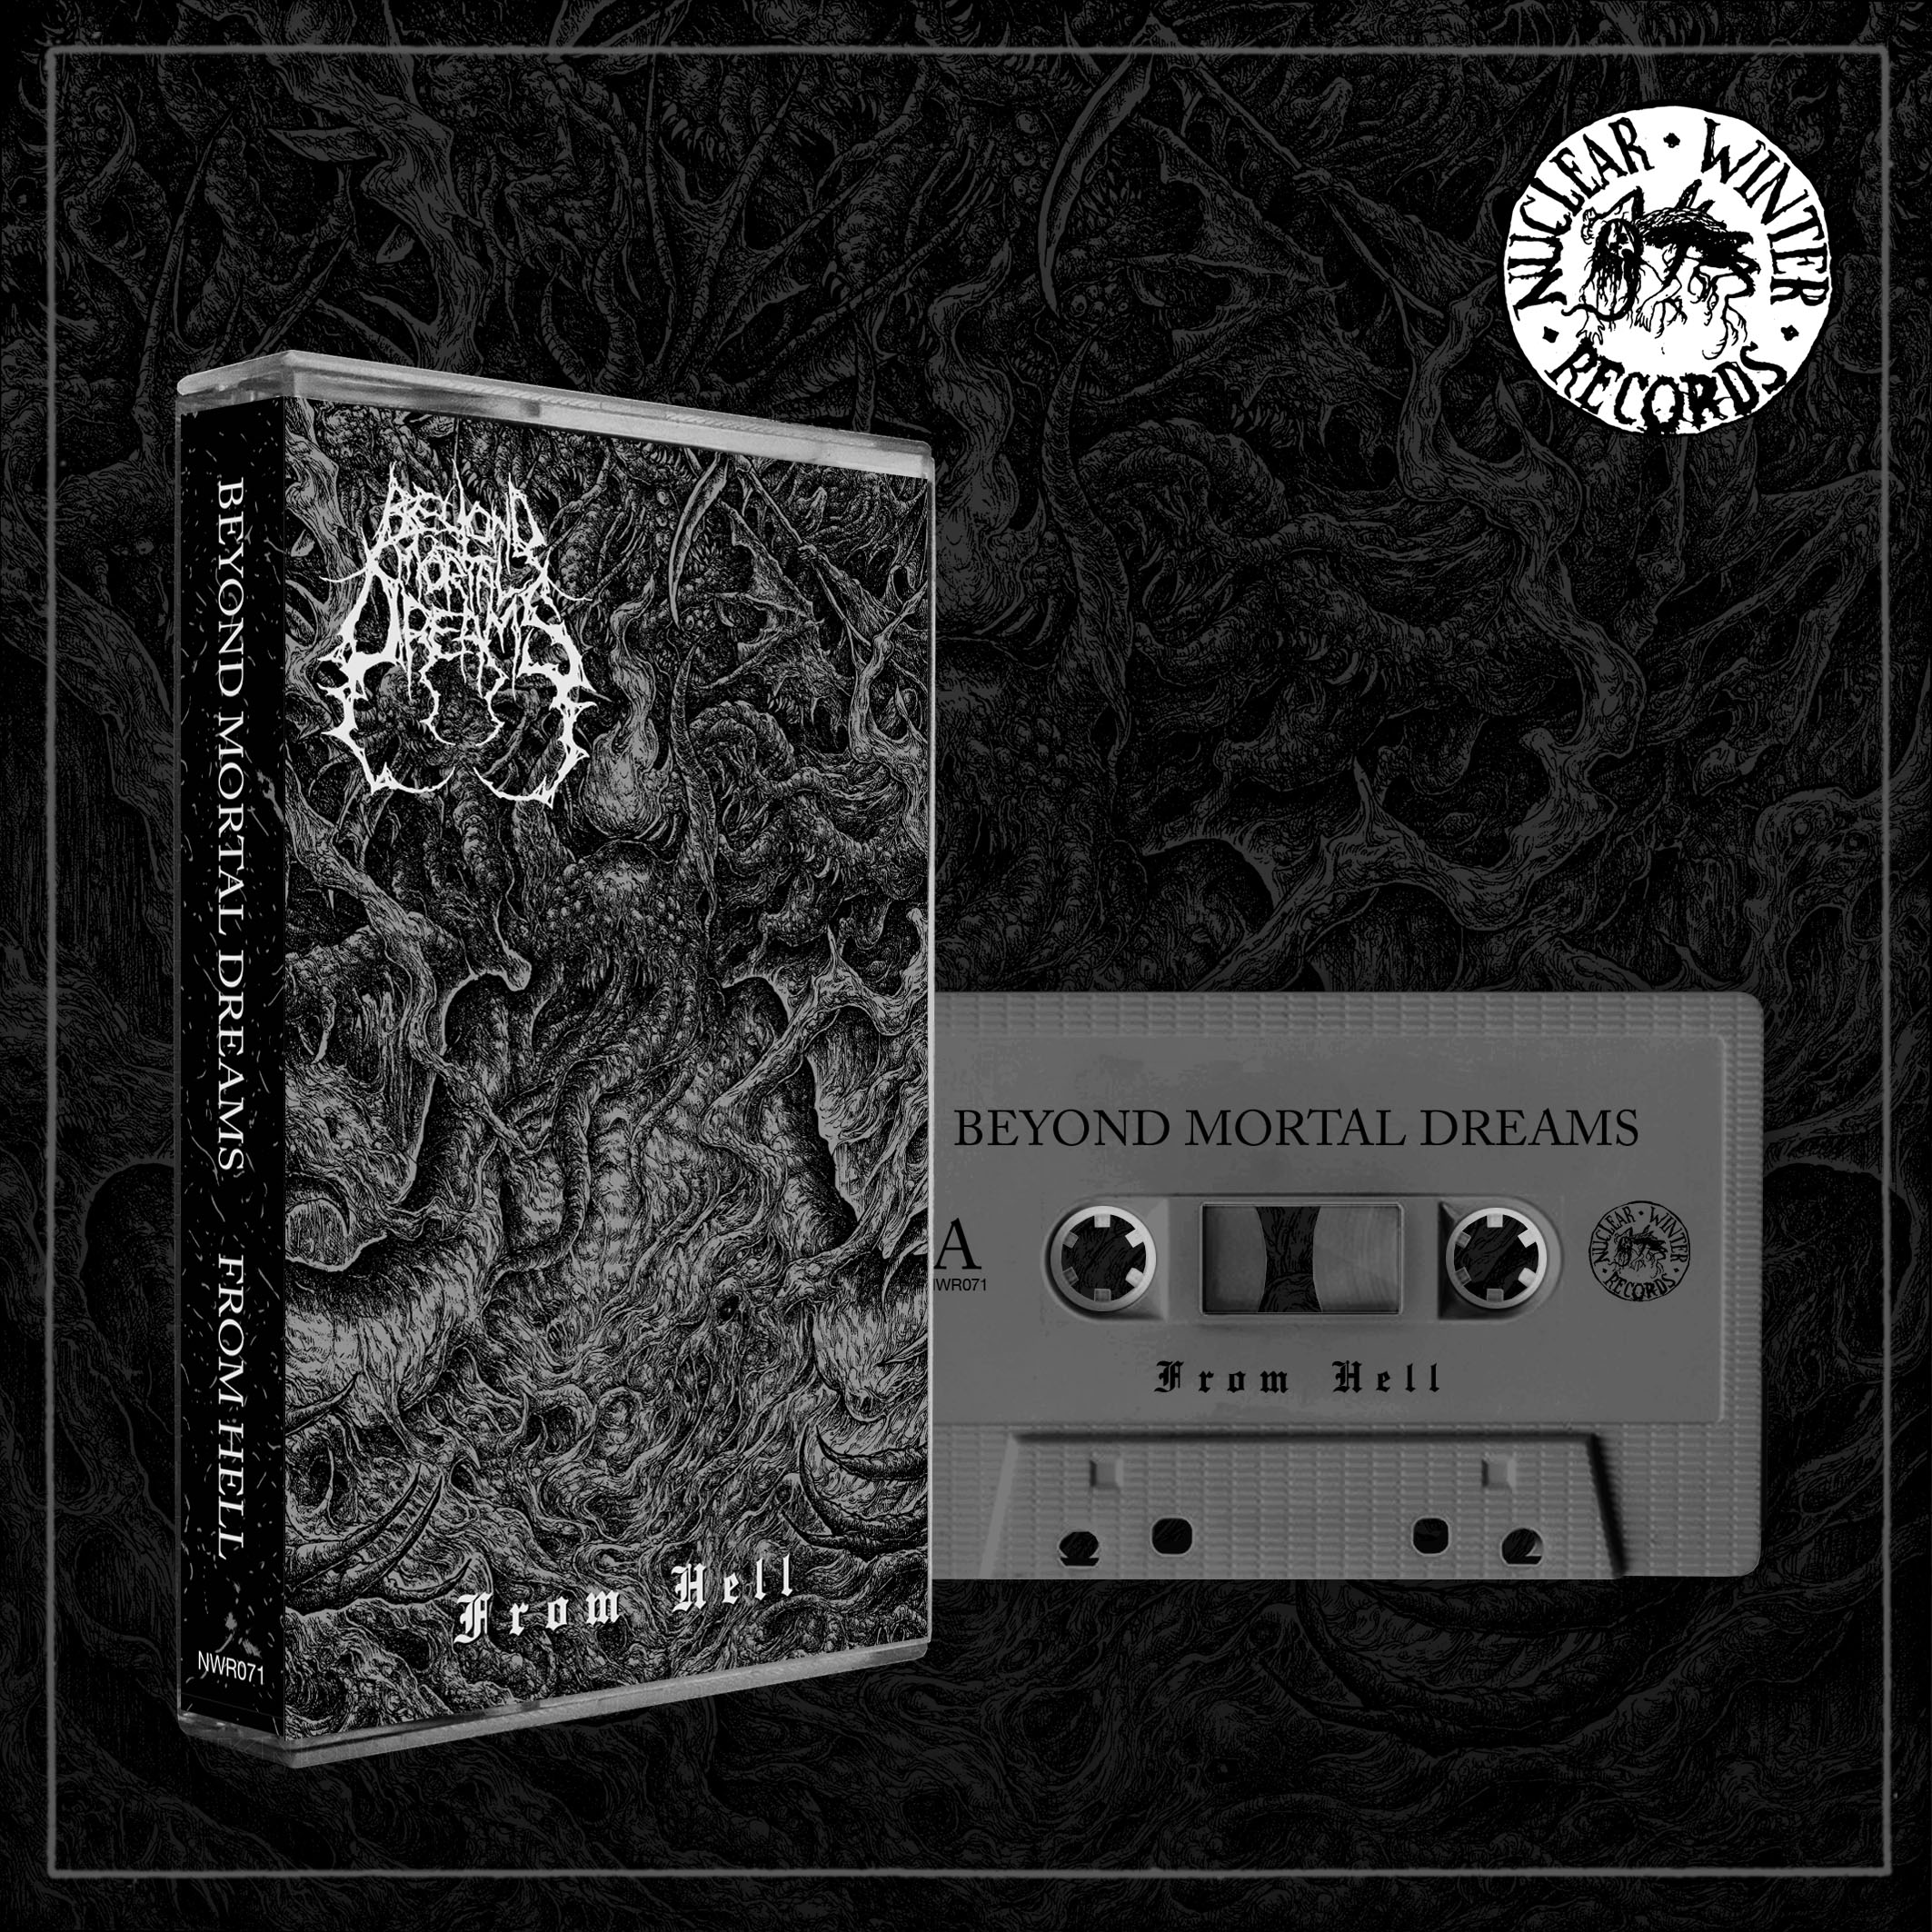 Beyond Mortal Dreams ‎- From Hell PRO-TAPE